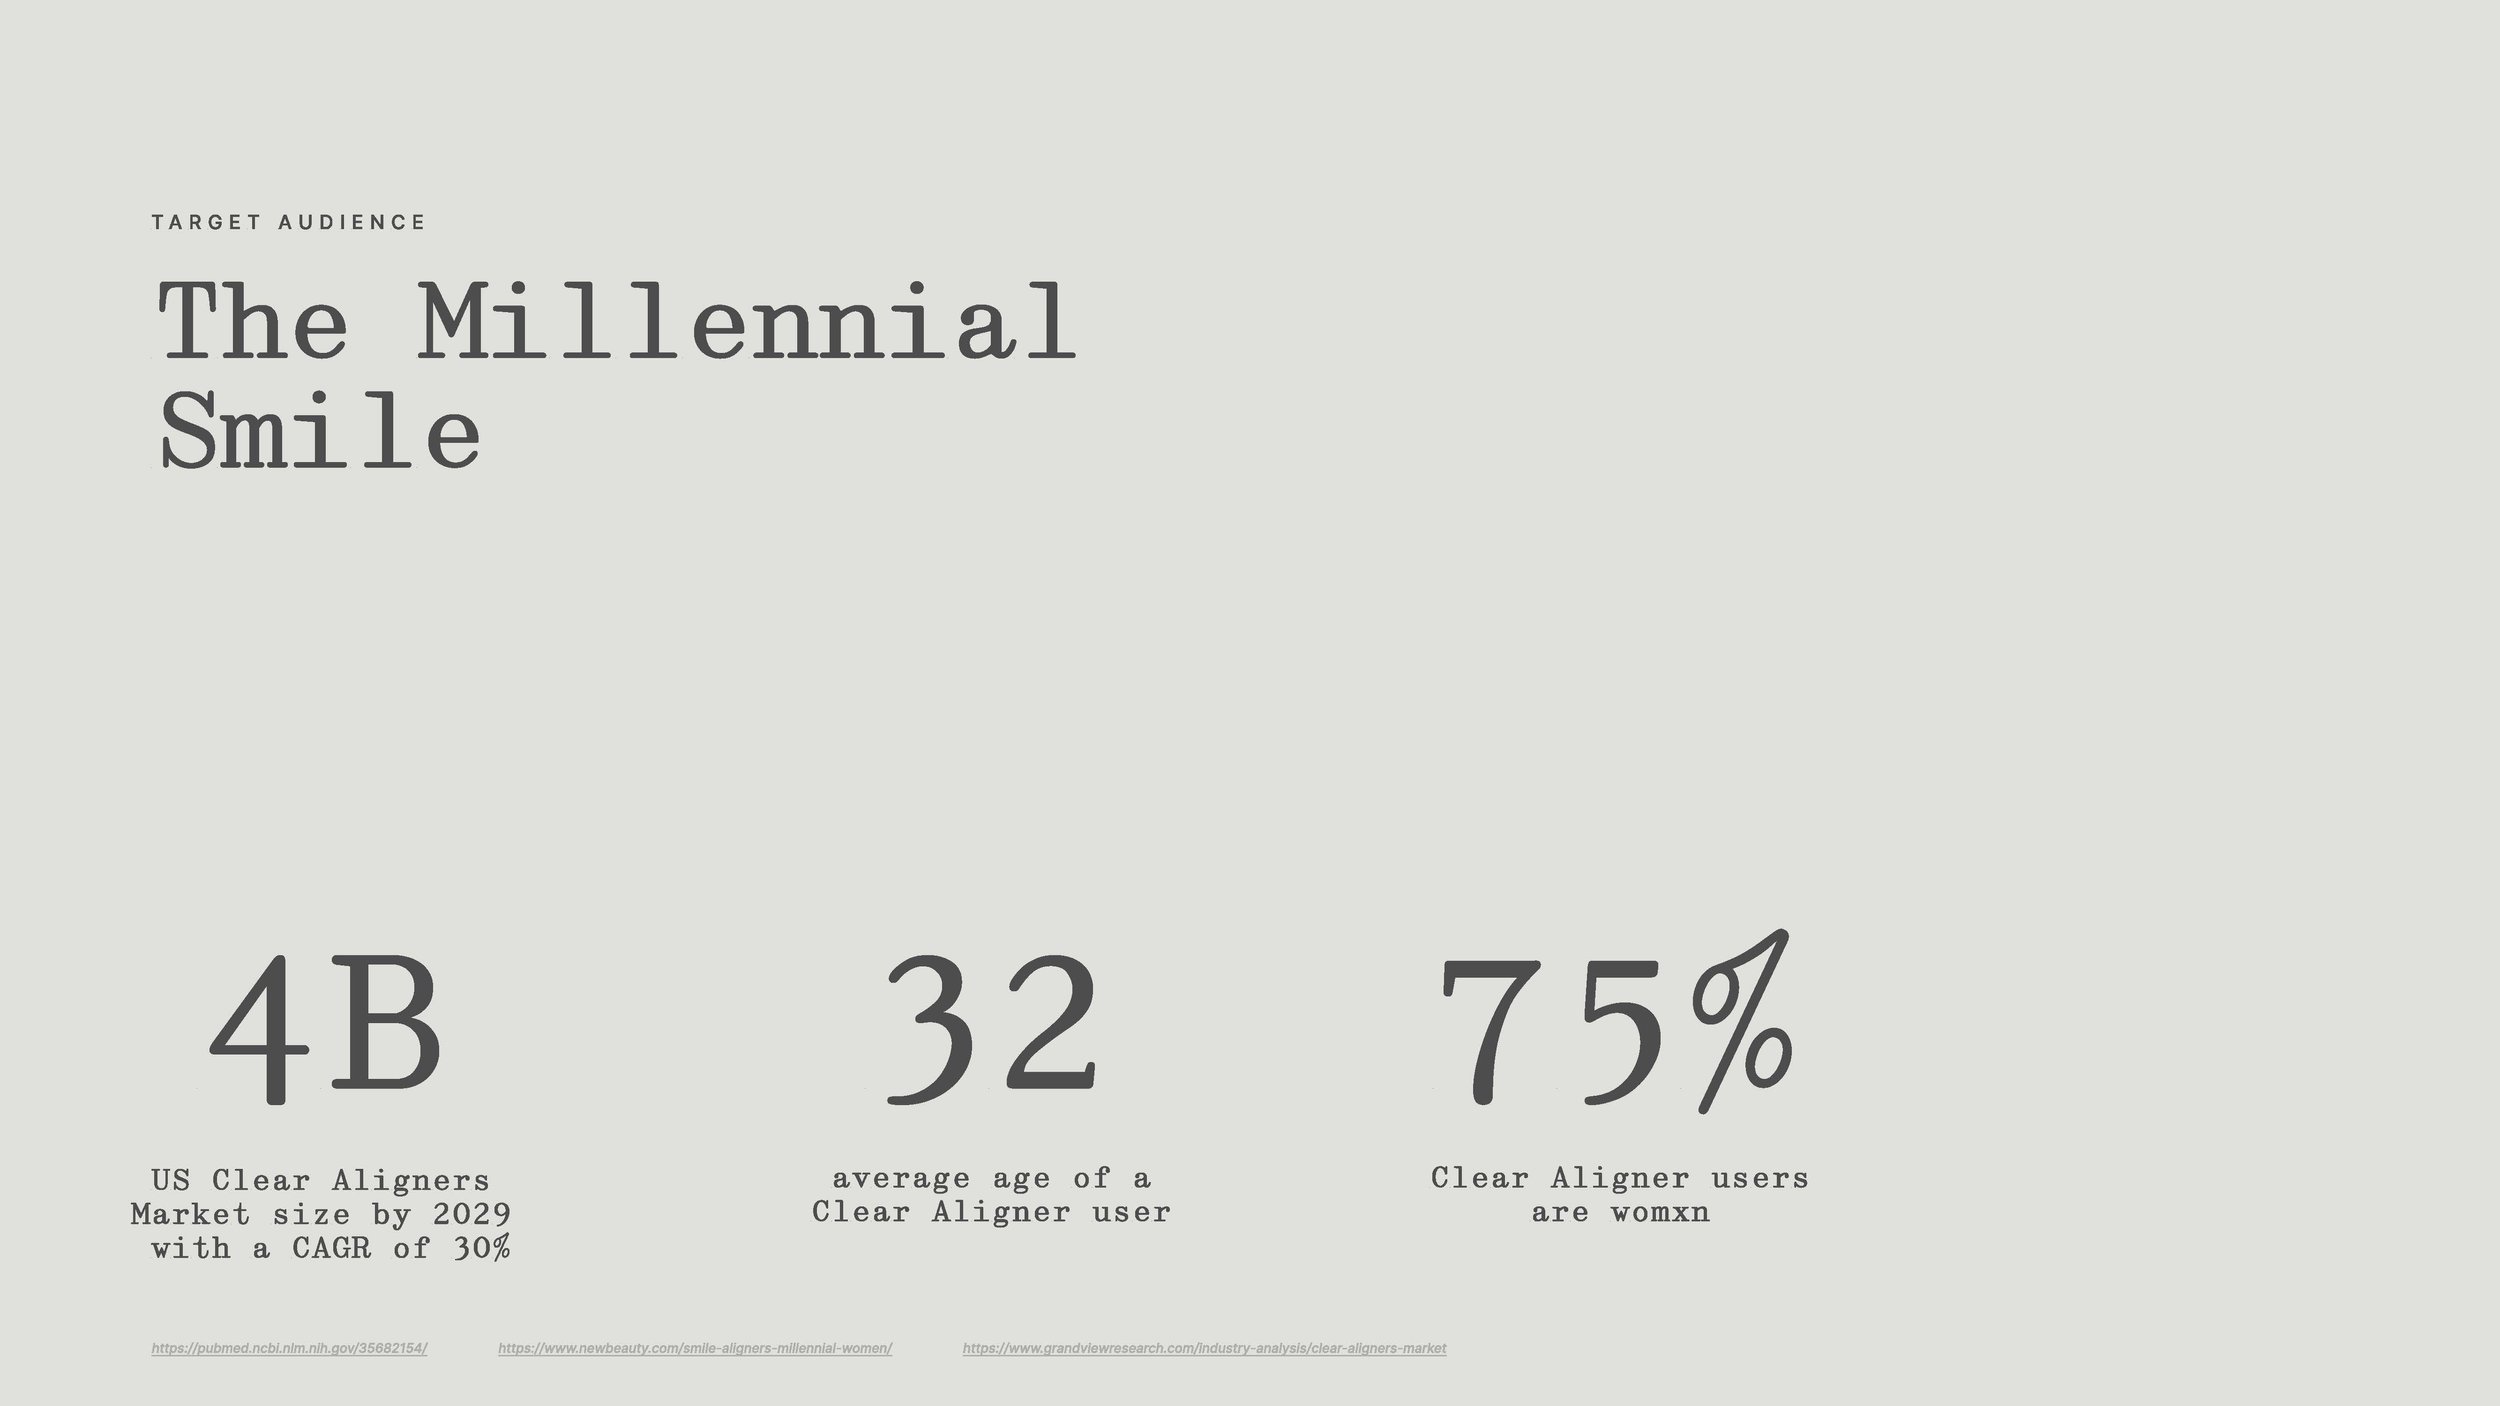  Slide with text reading “the Millennial Smile” 